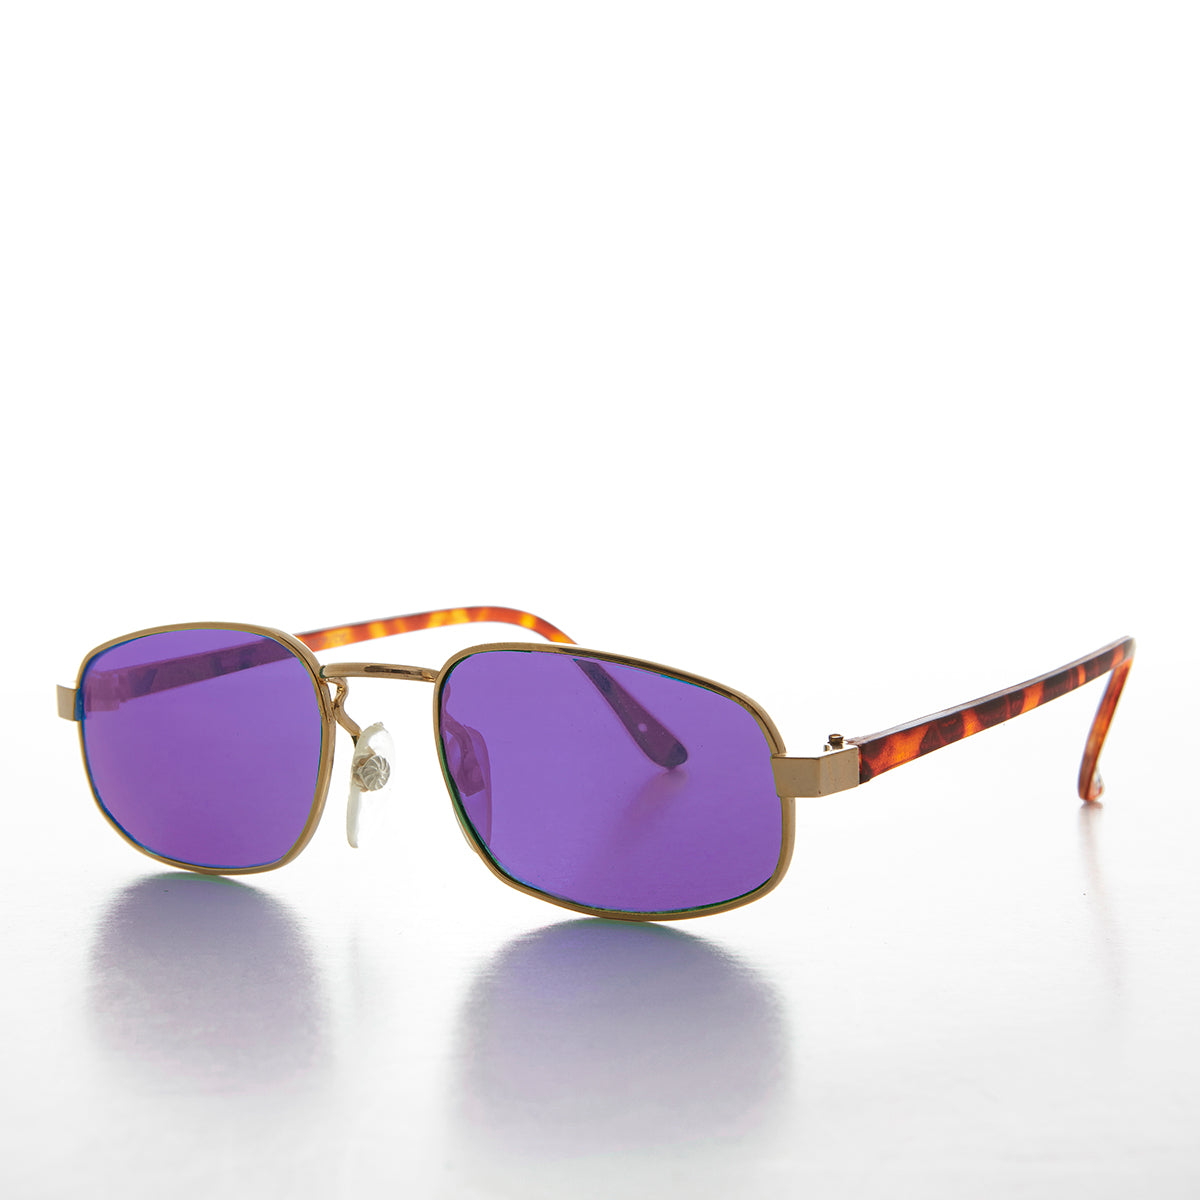 Small Rectangular Frame with Colored Tinted Lens